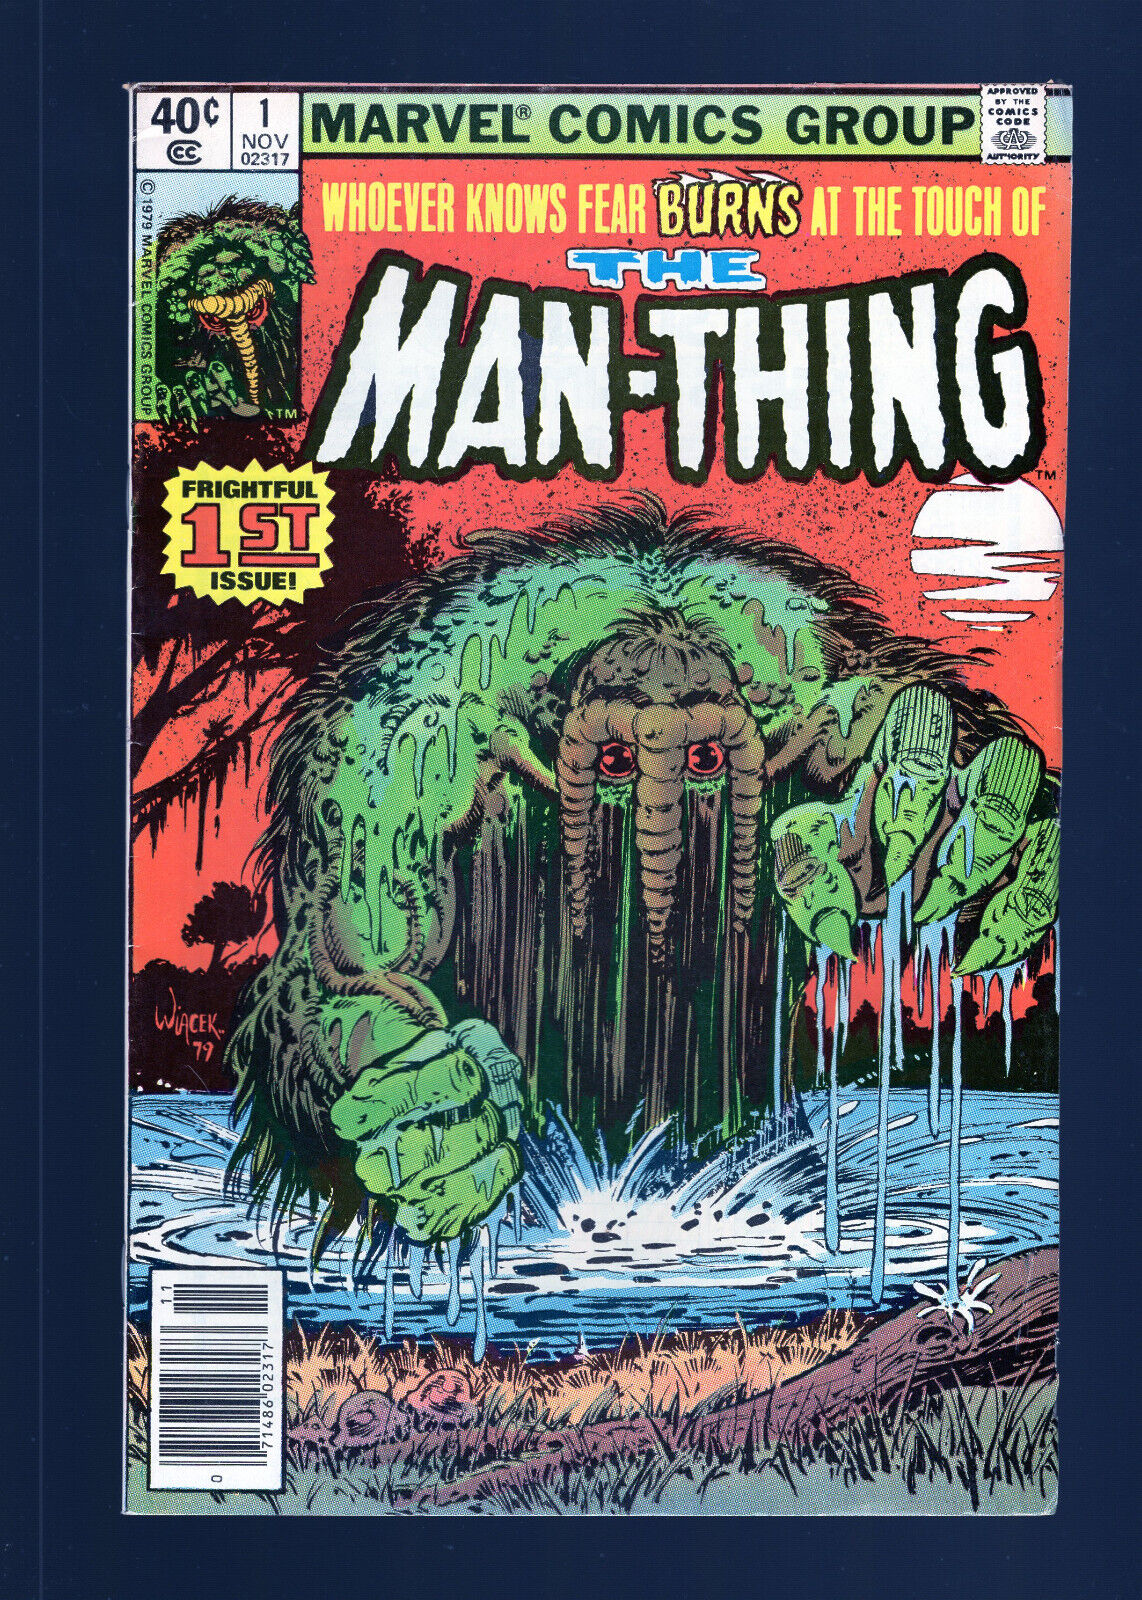 Man-Thing #1 - Origin of the Man-Thing Retold. Newsstand Edition. (5.5) 1979